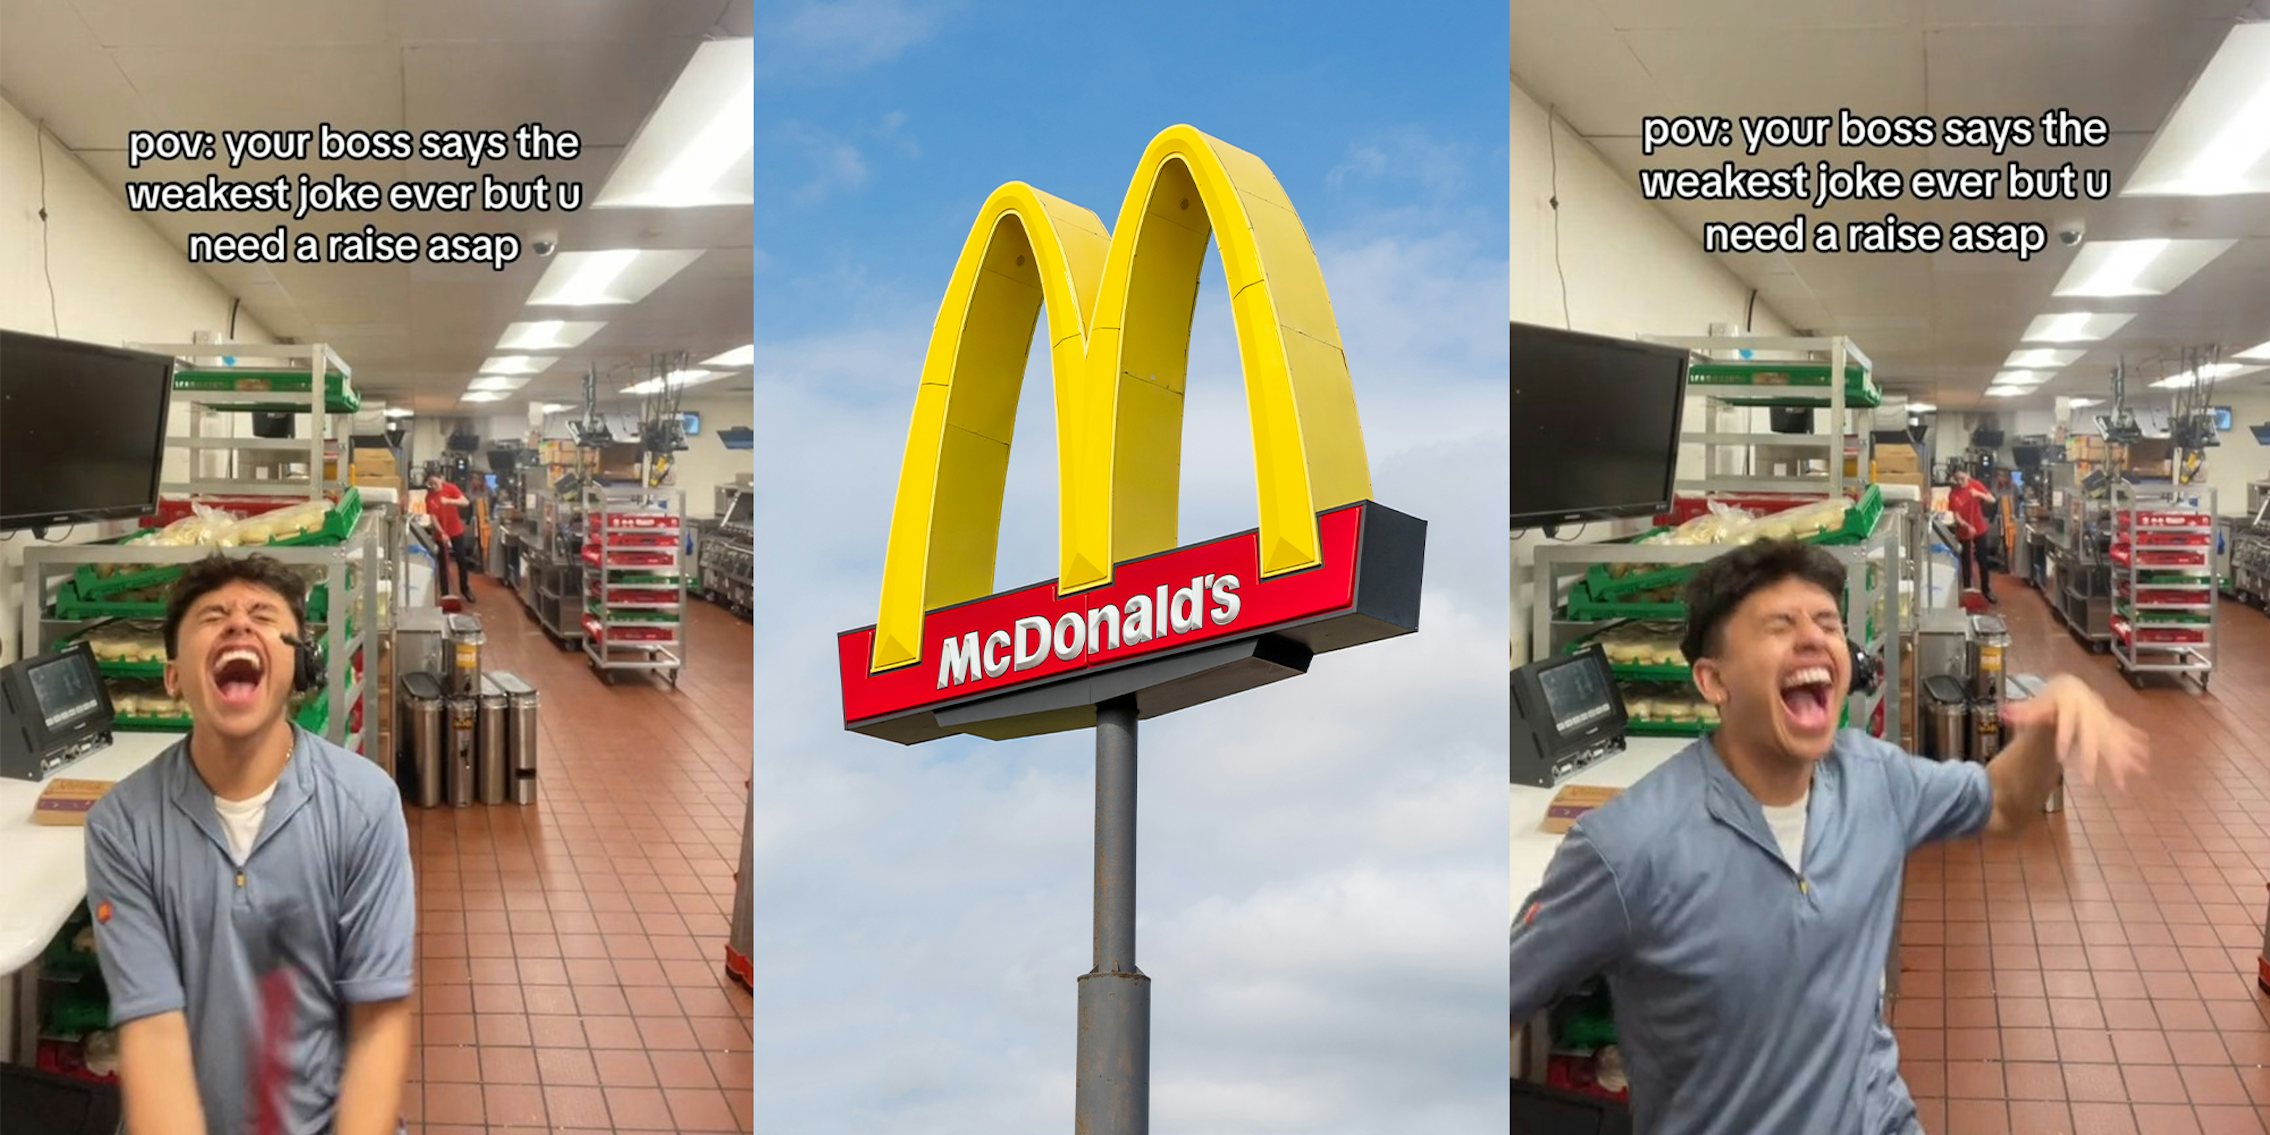 McDonald’s worker has to laugh at boss’ ‘weak’ joke. He’s trying to get a raise